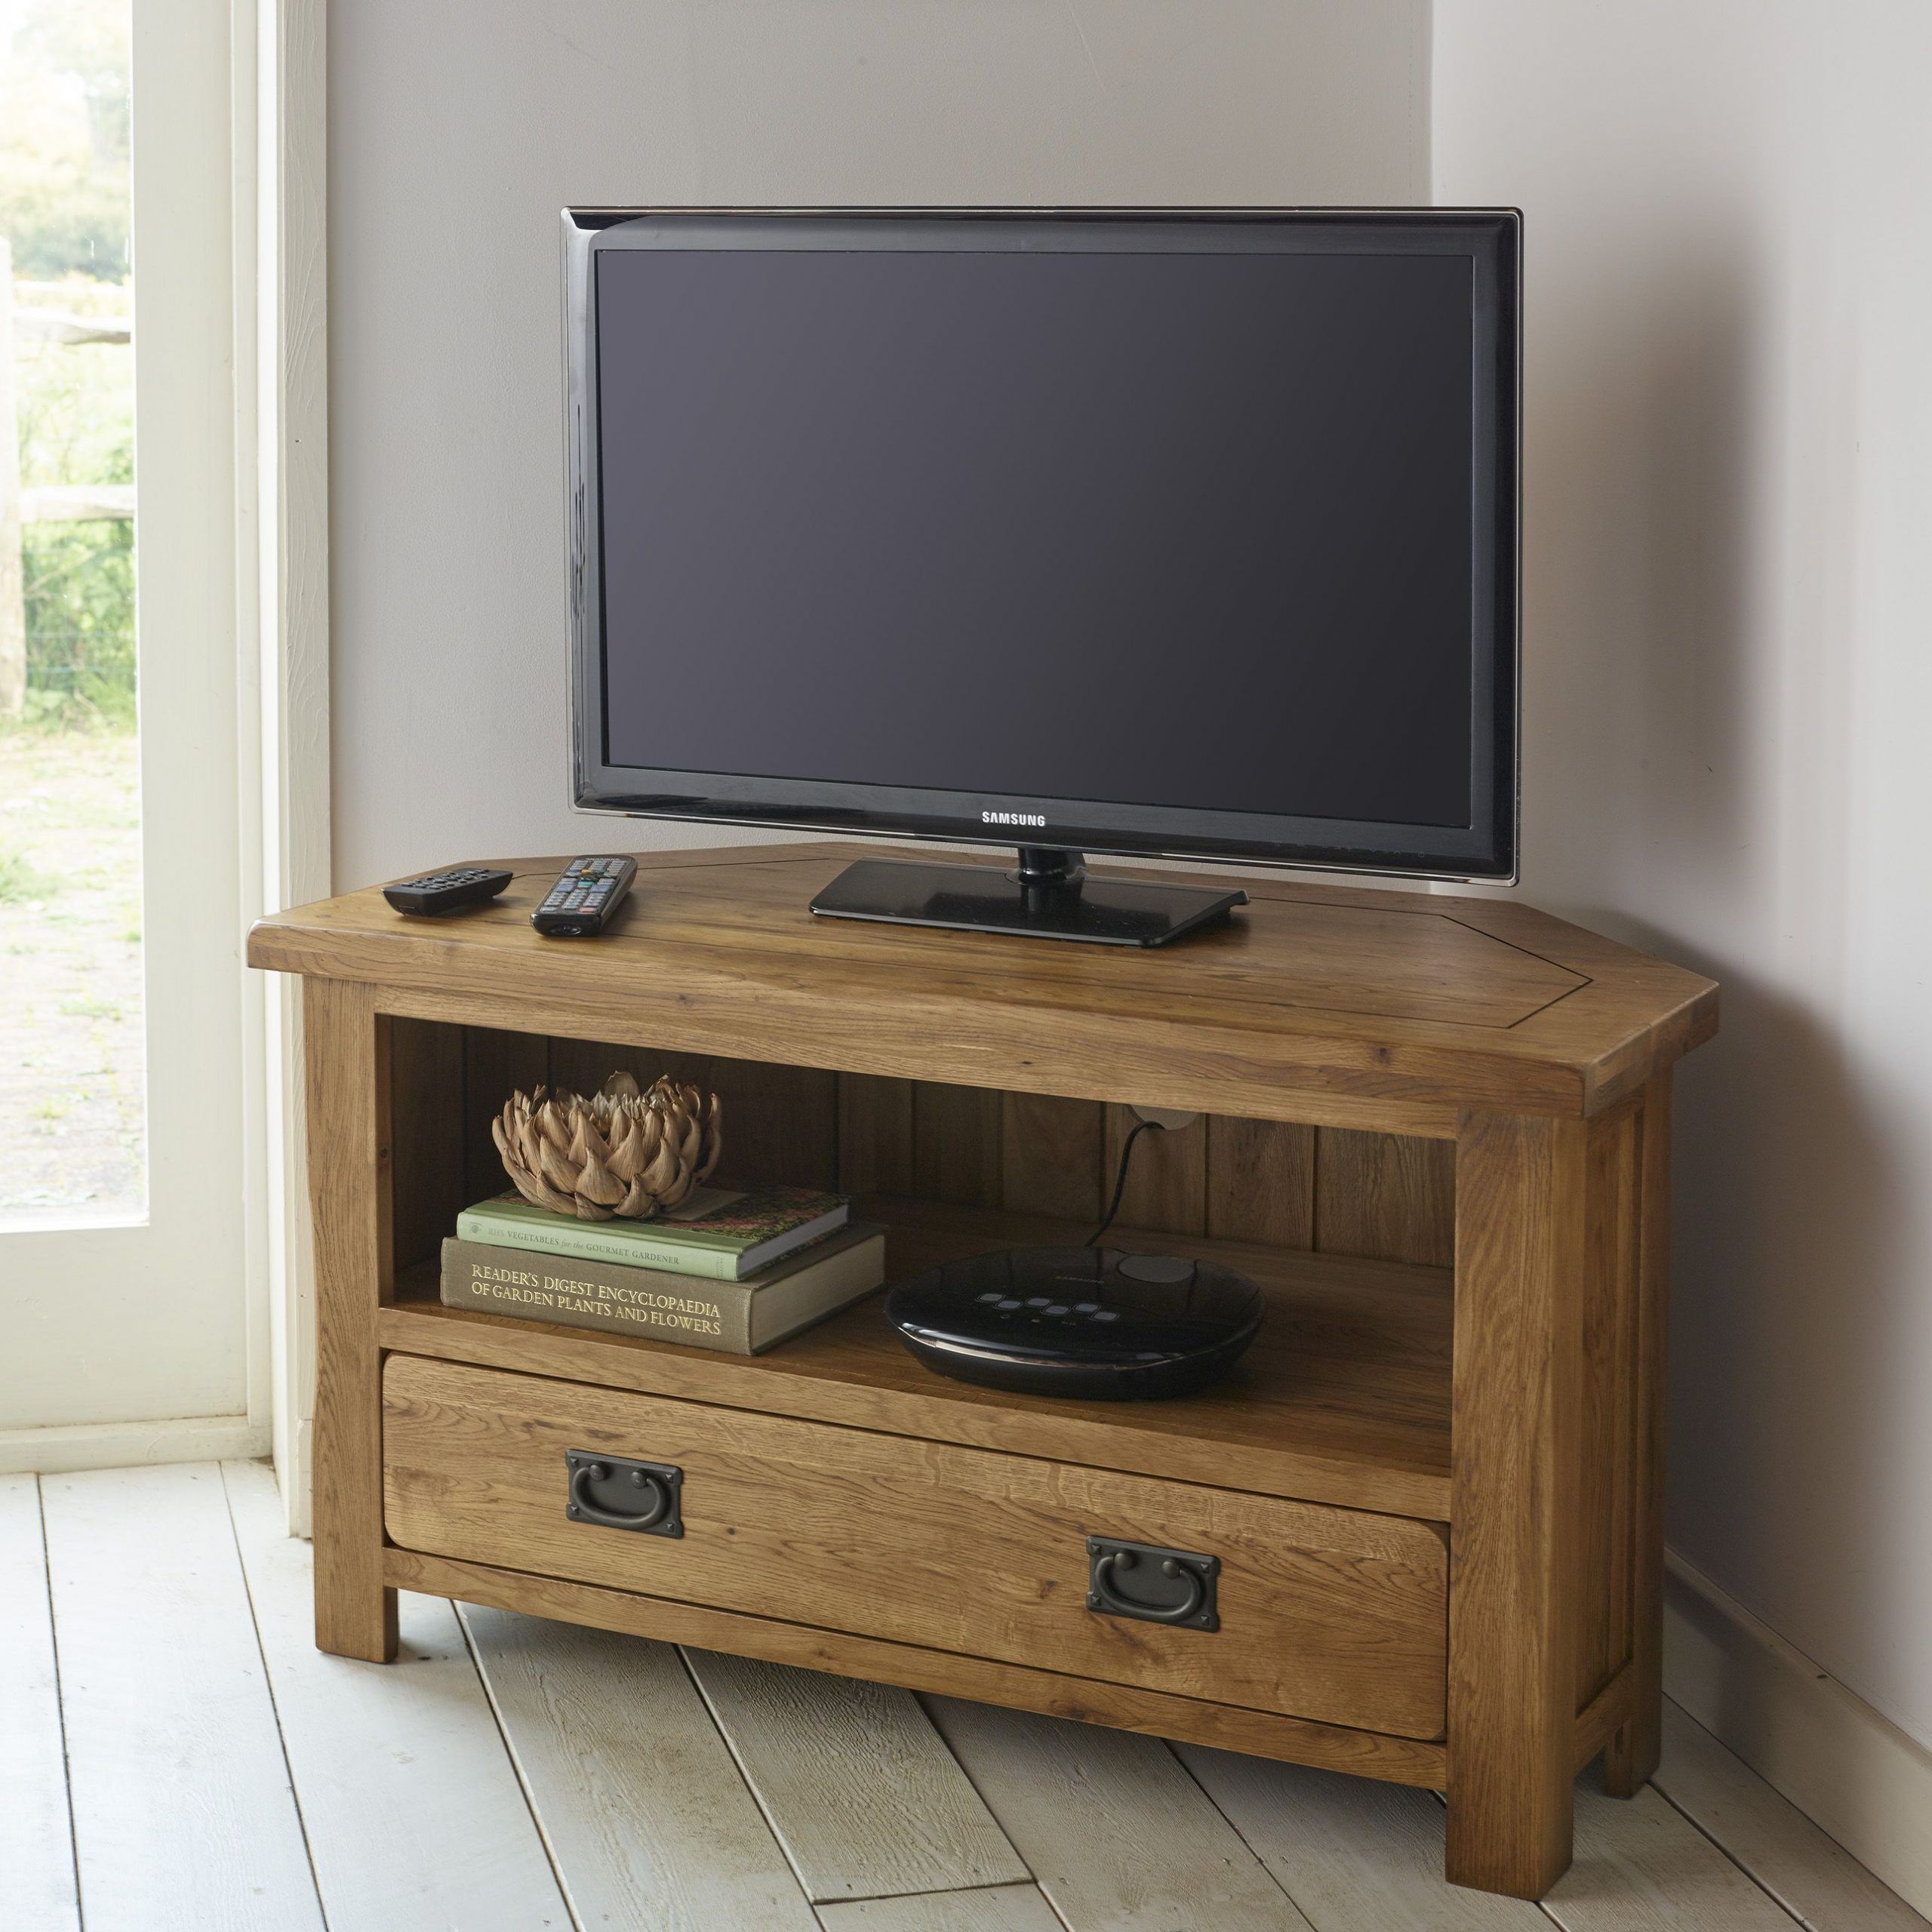 Original Rustic Solid Oak Tv Corner Cabinet | Corner Tv Throughout Tv Stands With Rounded Corners (View 4 of 15)